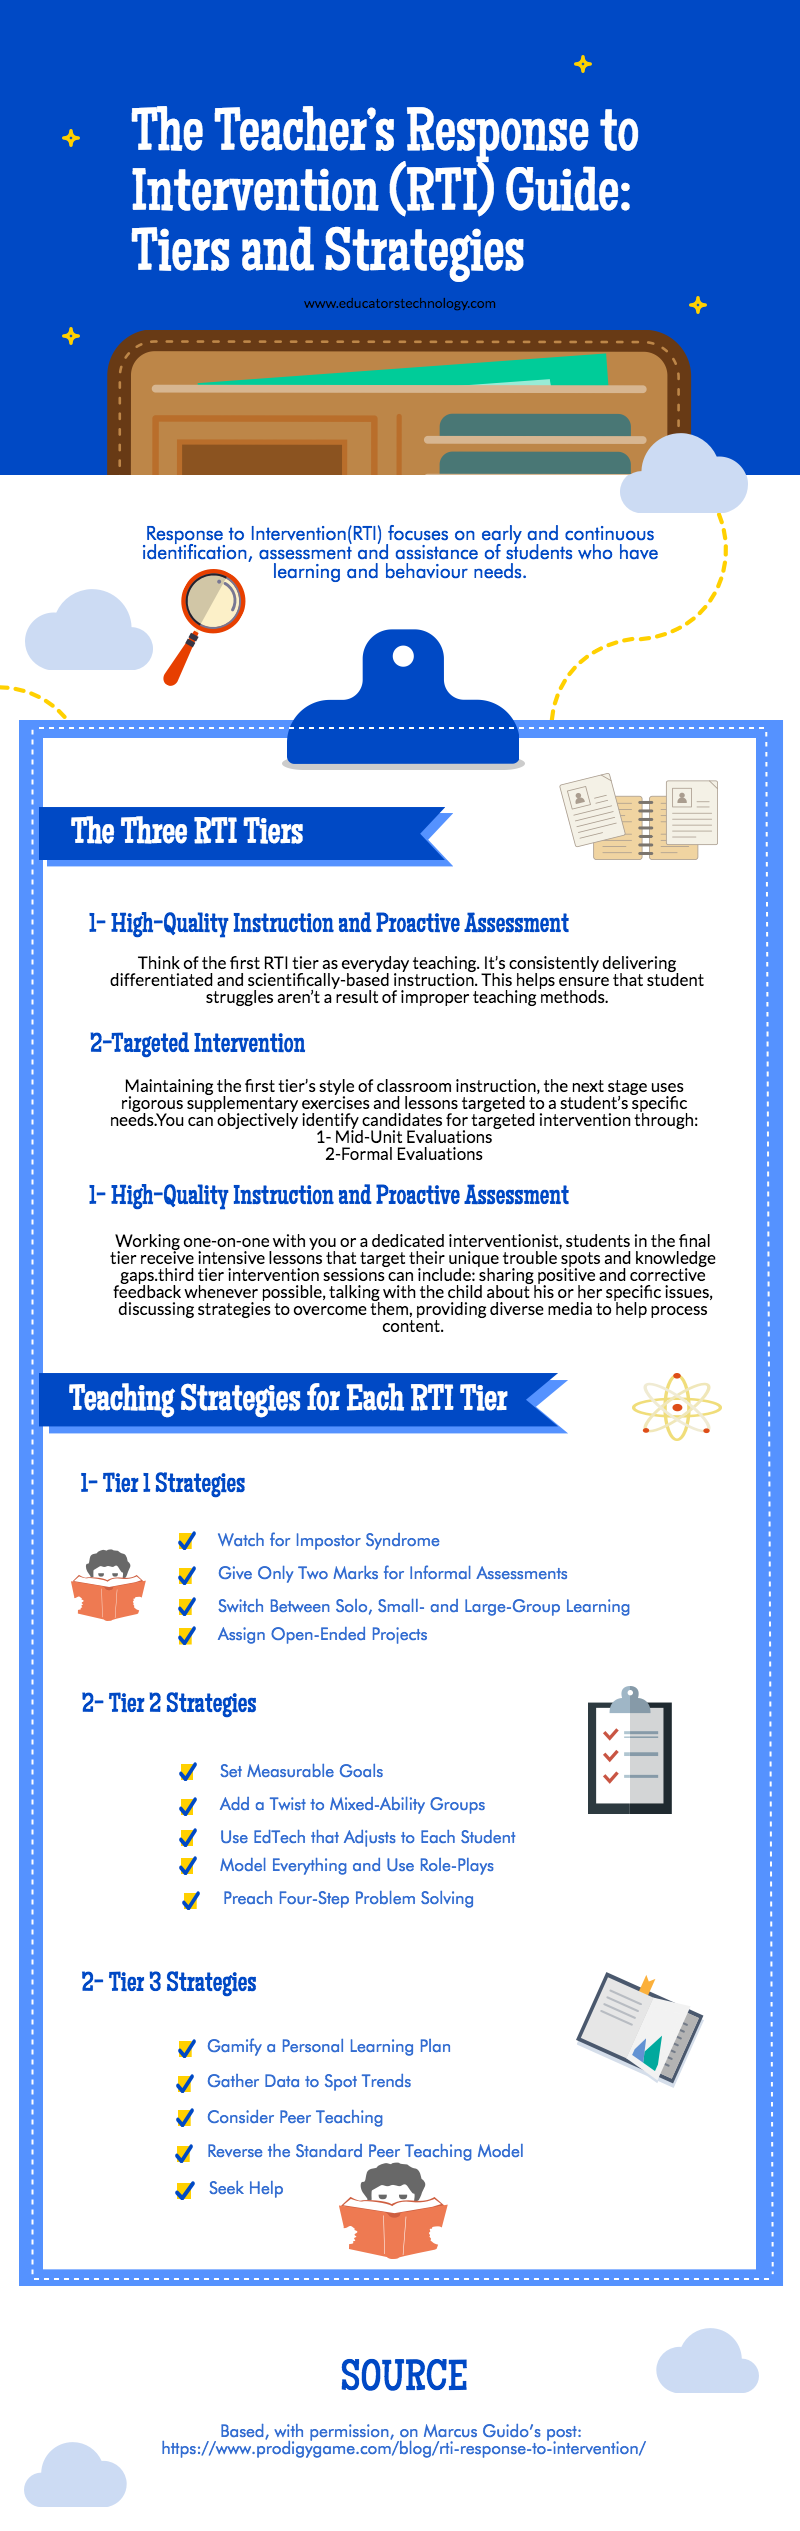 The Teacher’s Response to Intervention (RTI) Guide